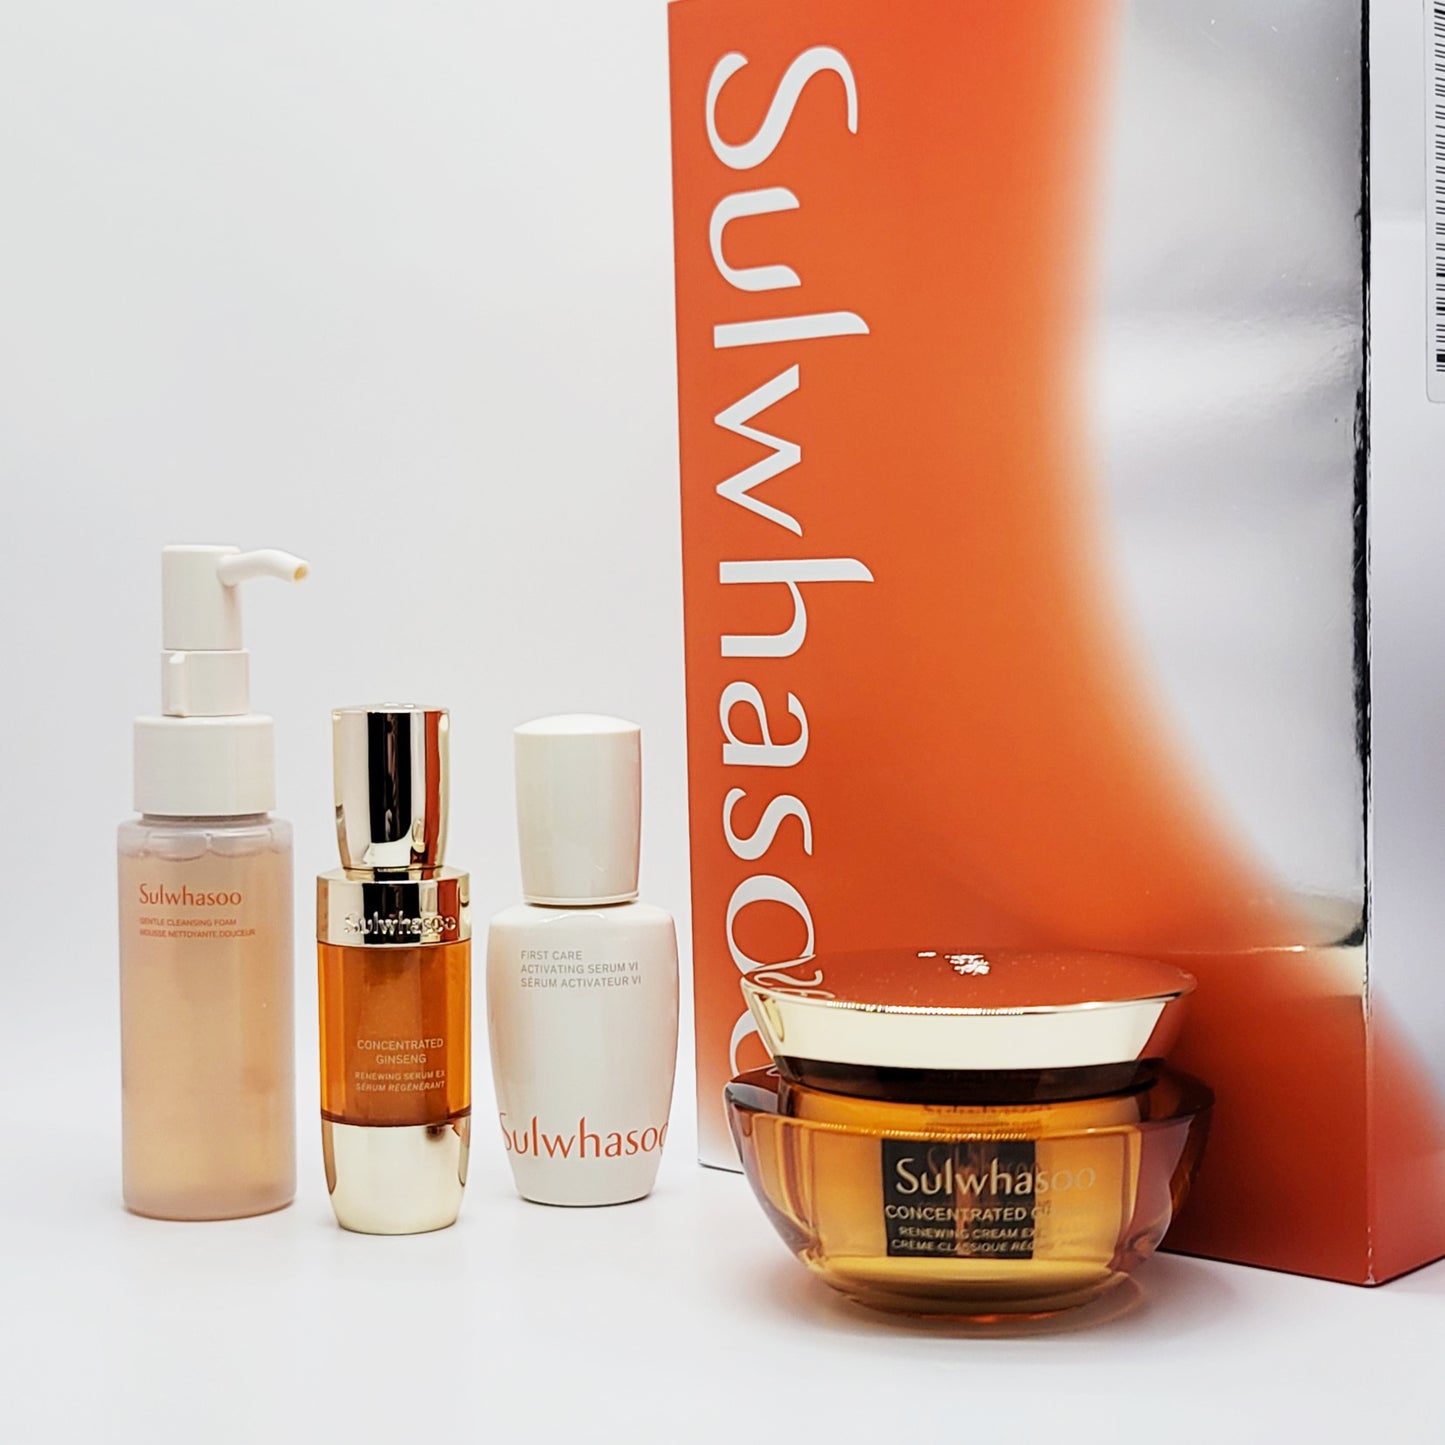 Sulwhasoo Concentrated Ginseng Renewing Cream 2.02 oz.+Kits Set/Original Classic